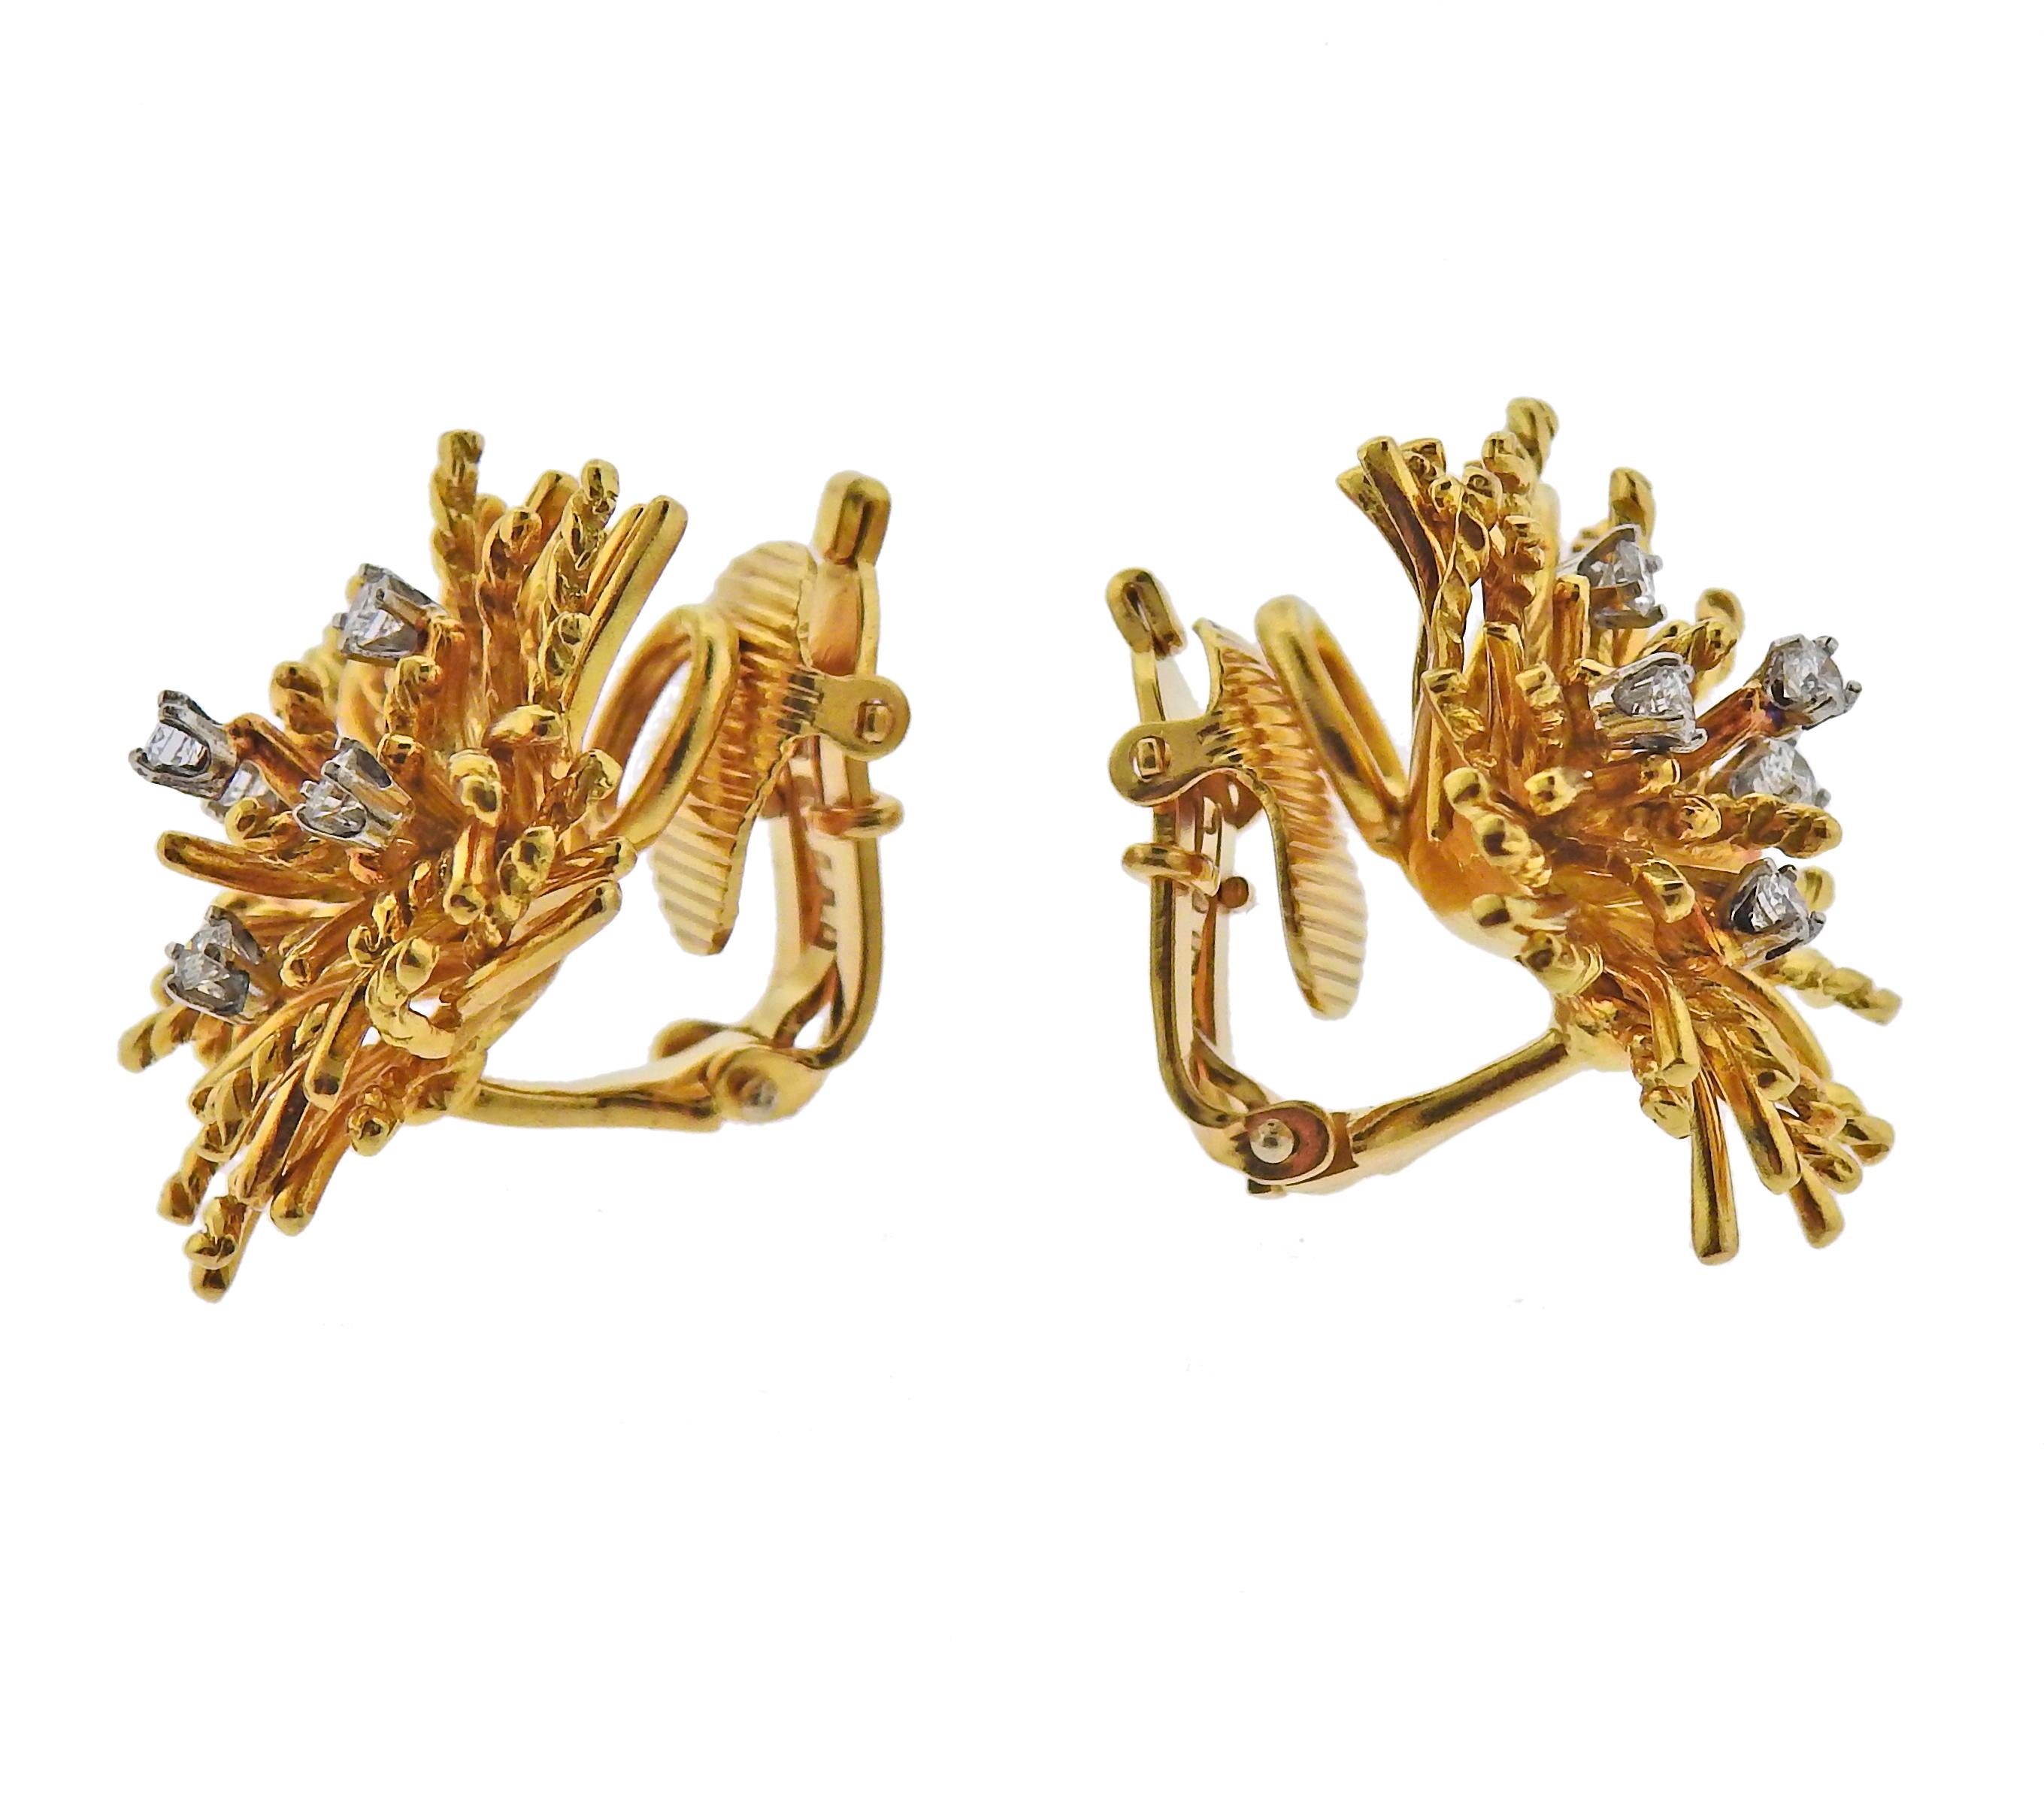 Pair of 18k gold anemone earrings by Tiffany & Co, with approx. 0.42ctw in G/VS diamonds. Earrings are 26mm x 28mm. Weight - 21.6 grams. Marked: Tiffany & Co,  750.